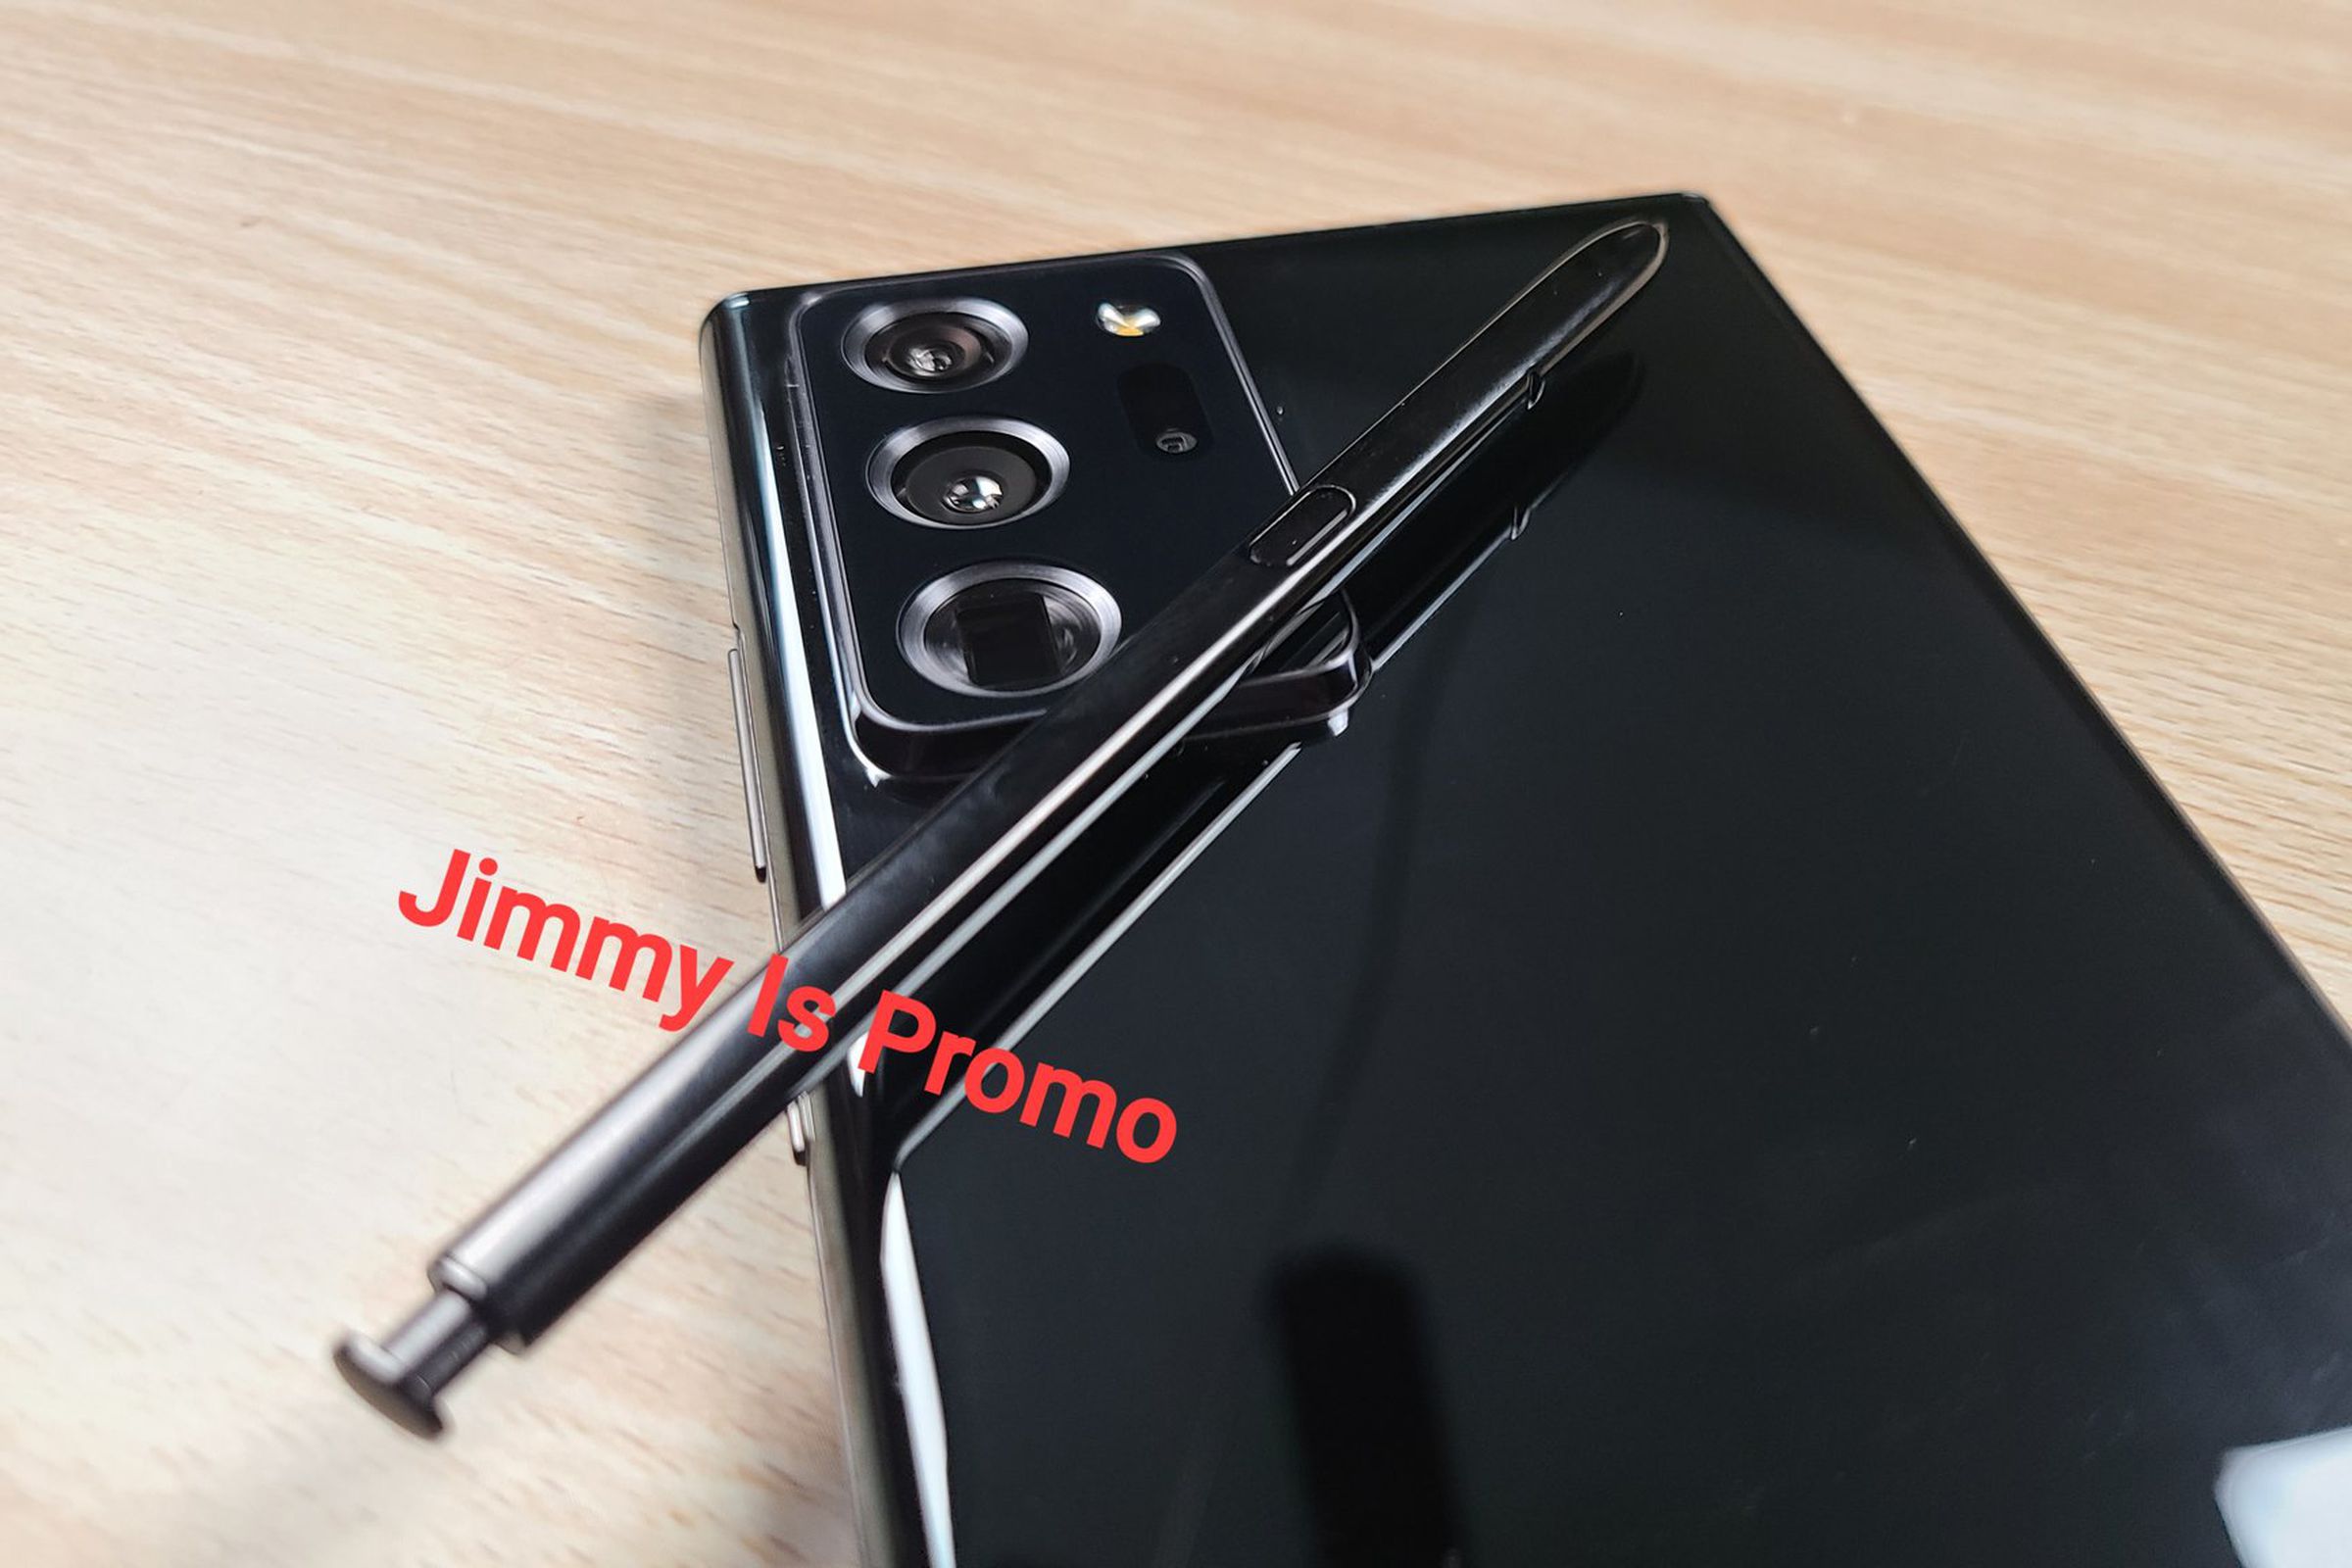 From the images, the Note 20 appears to have a similar camera bump to the Galaxy S20.